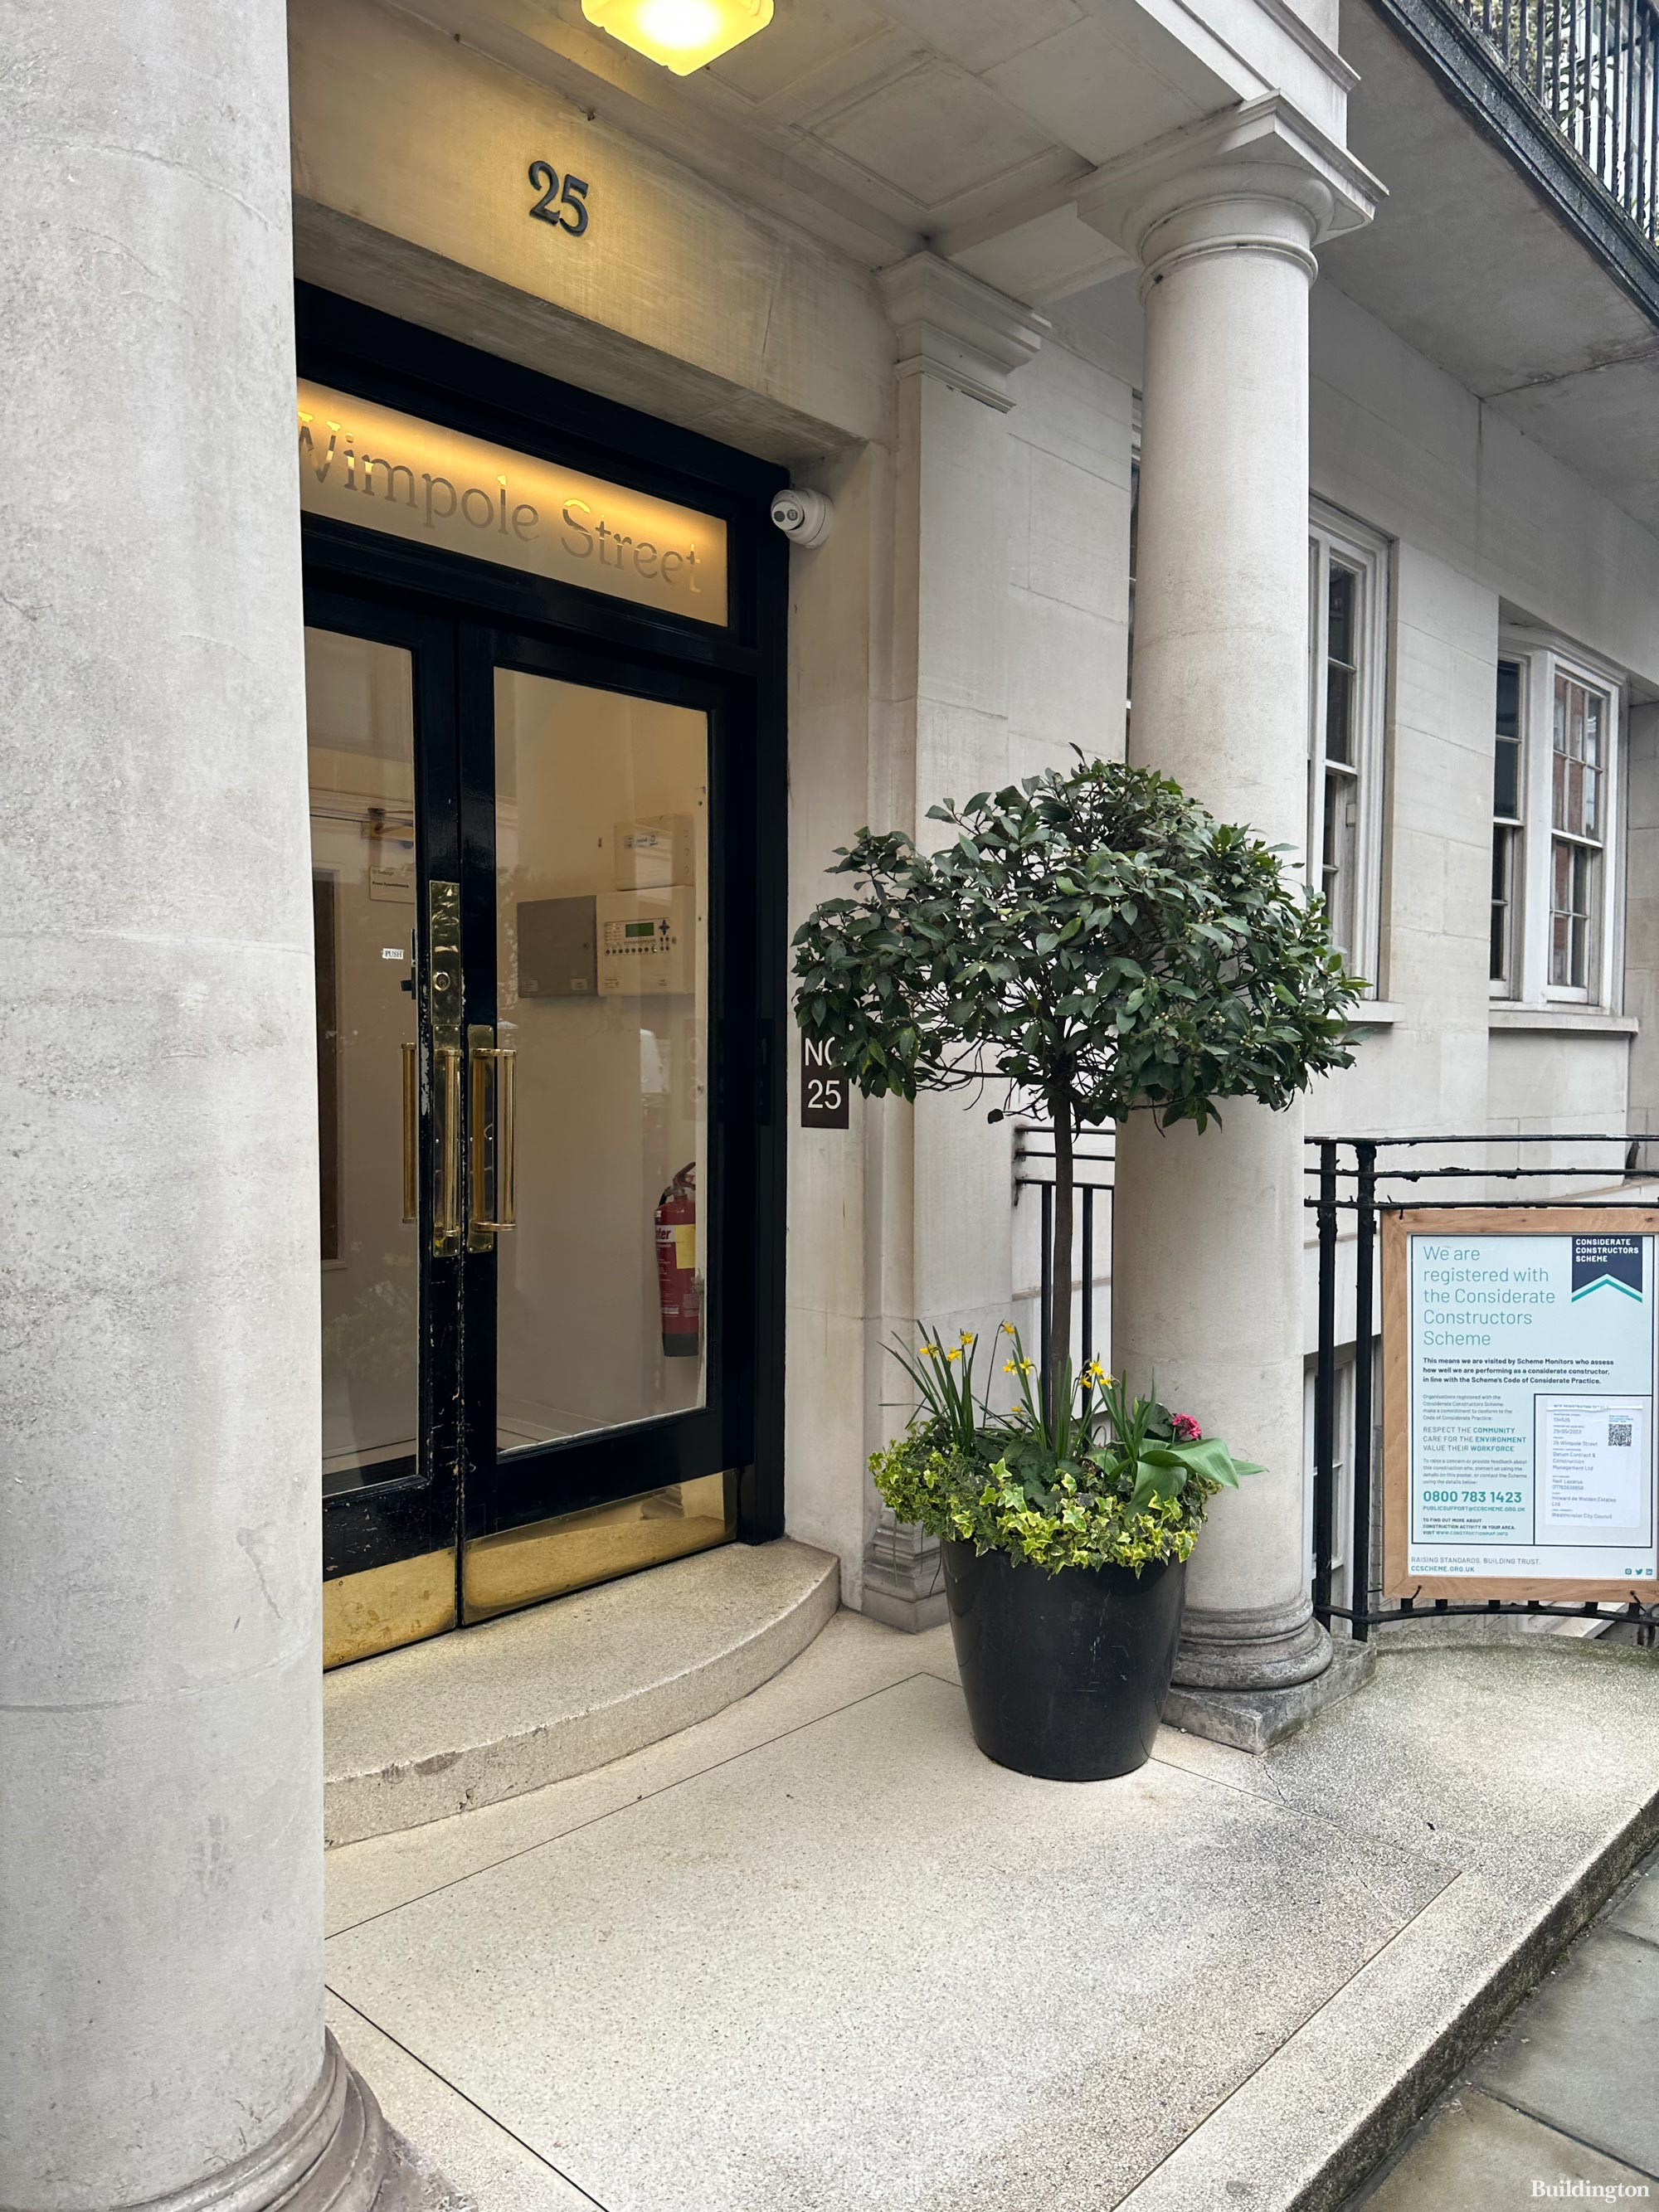 25 Wimpole Street building entrance during refurbishment works in Spring 2023.